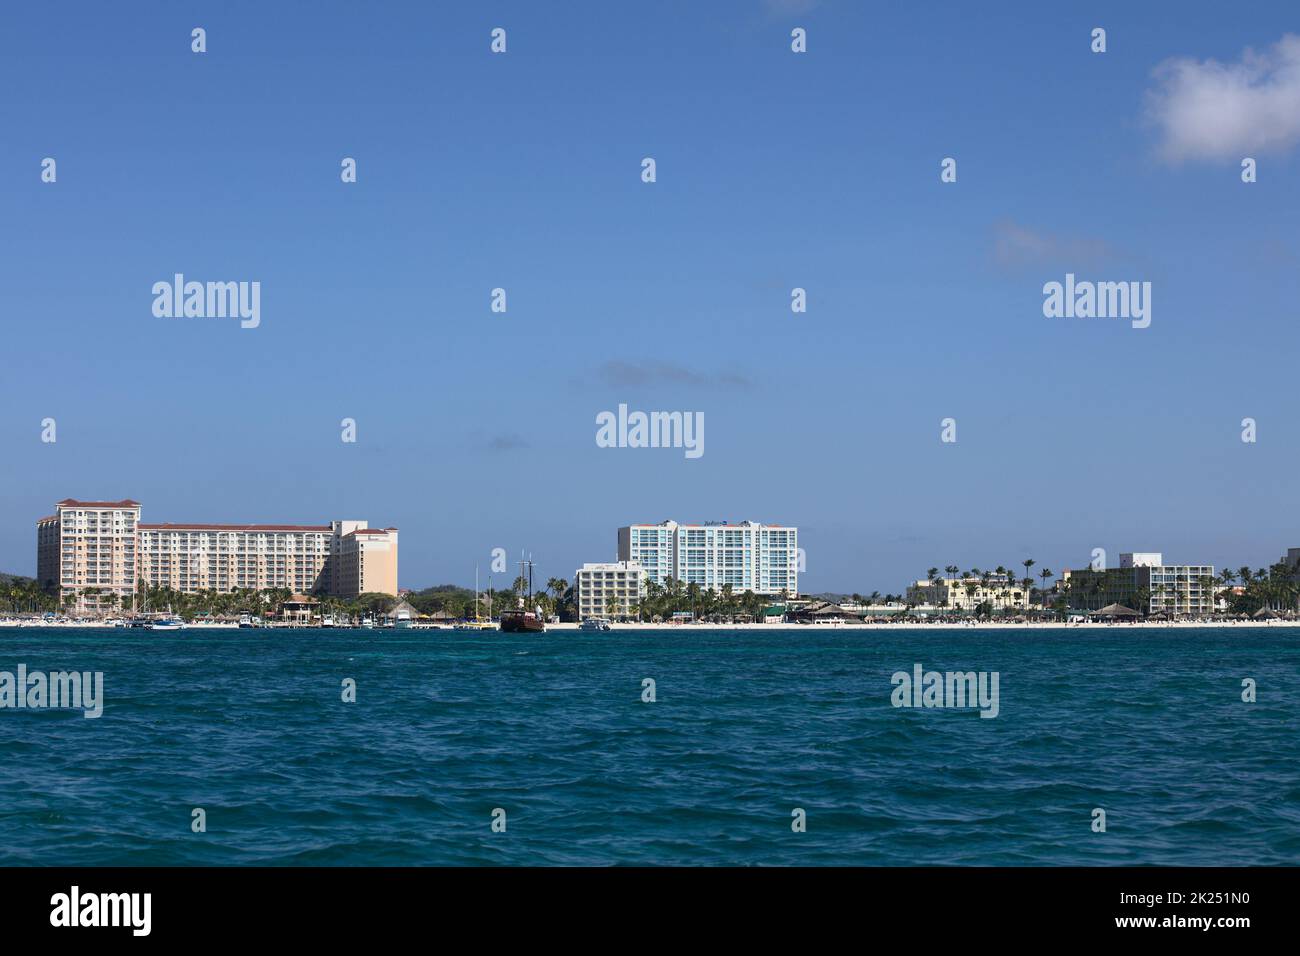 PALM BEACH, ARUBA - OCTOBER 17, 2021: View from the sea of the Marriott and Radisson Blu hotels as well as the Holiday Inn Resort along Palm Beach on Stock Photo